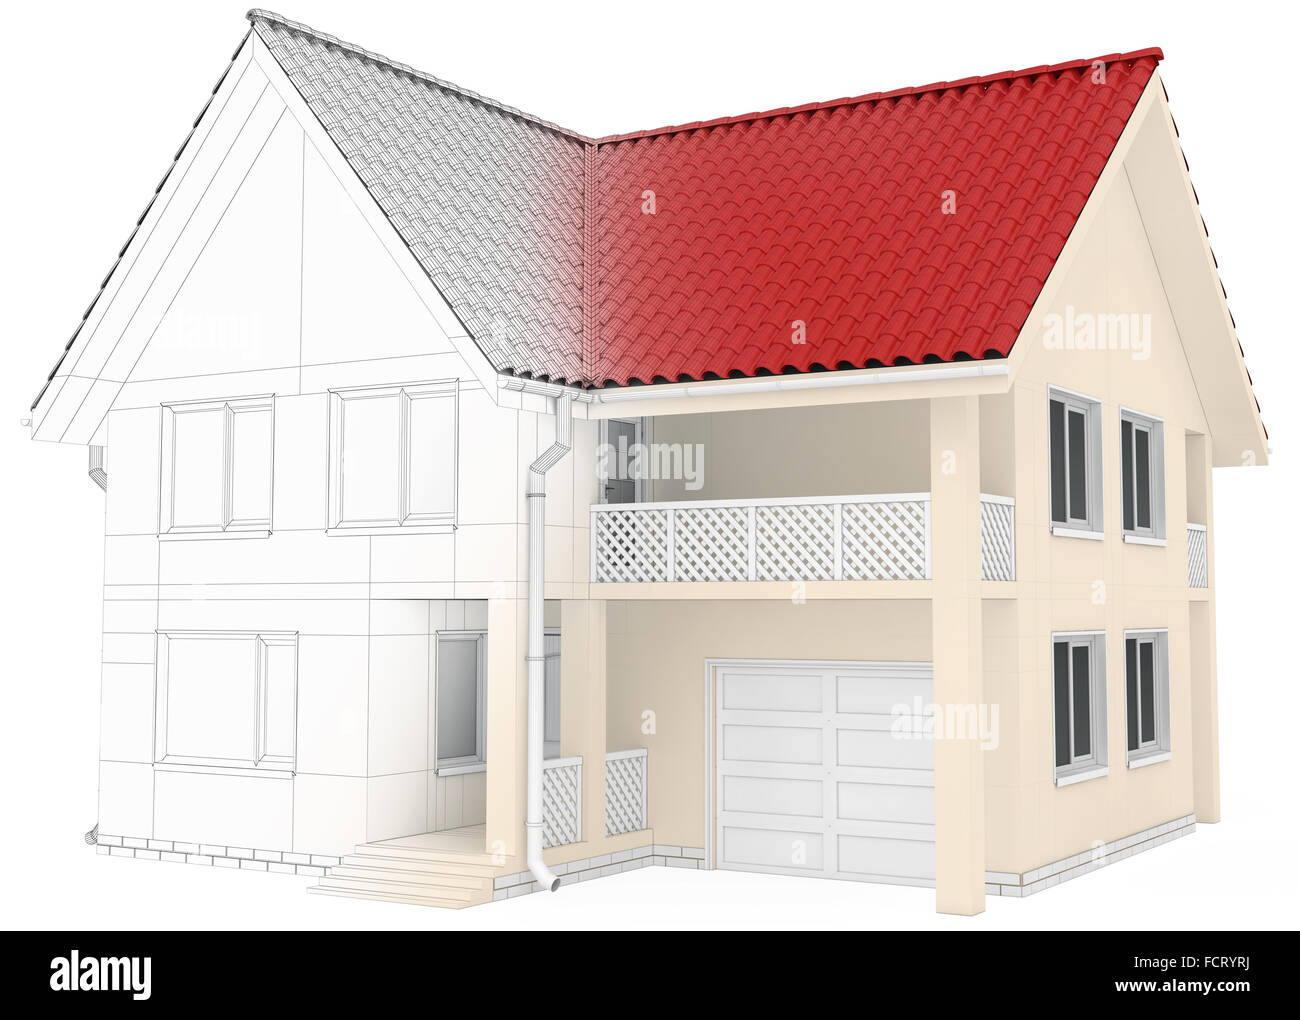 house wireframe, architectural drawing and visualization Stock Photo